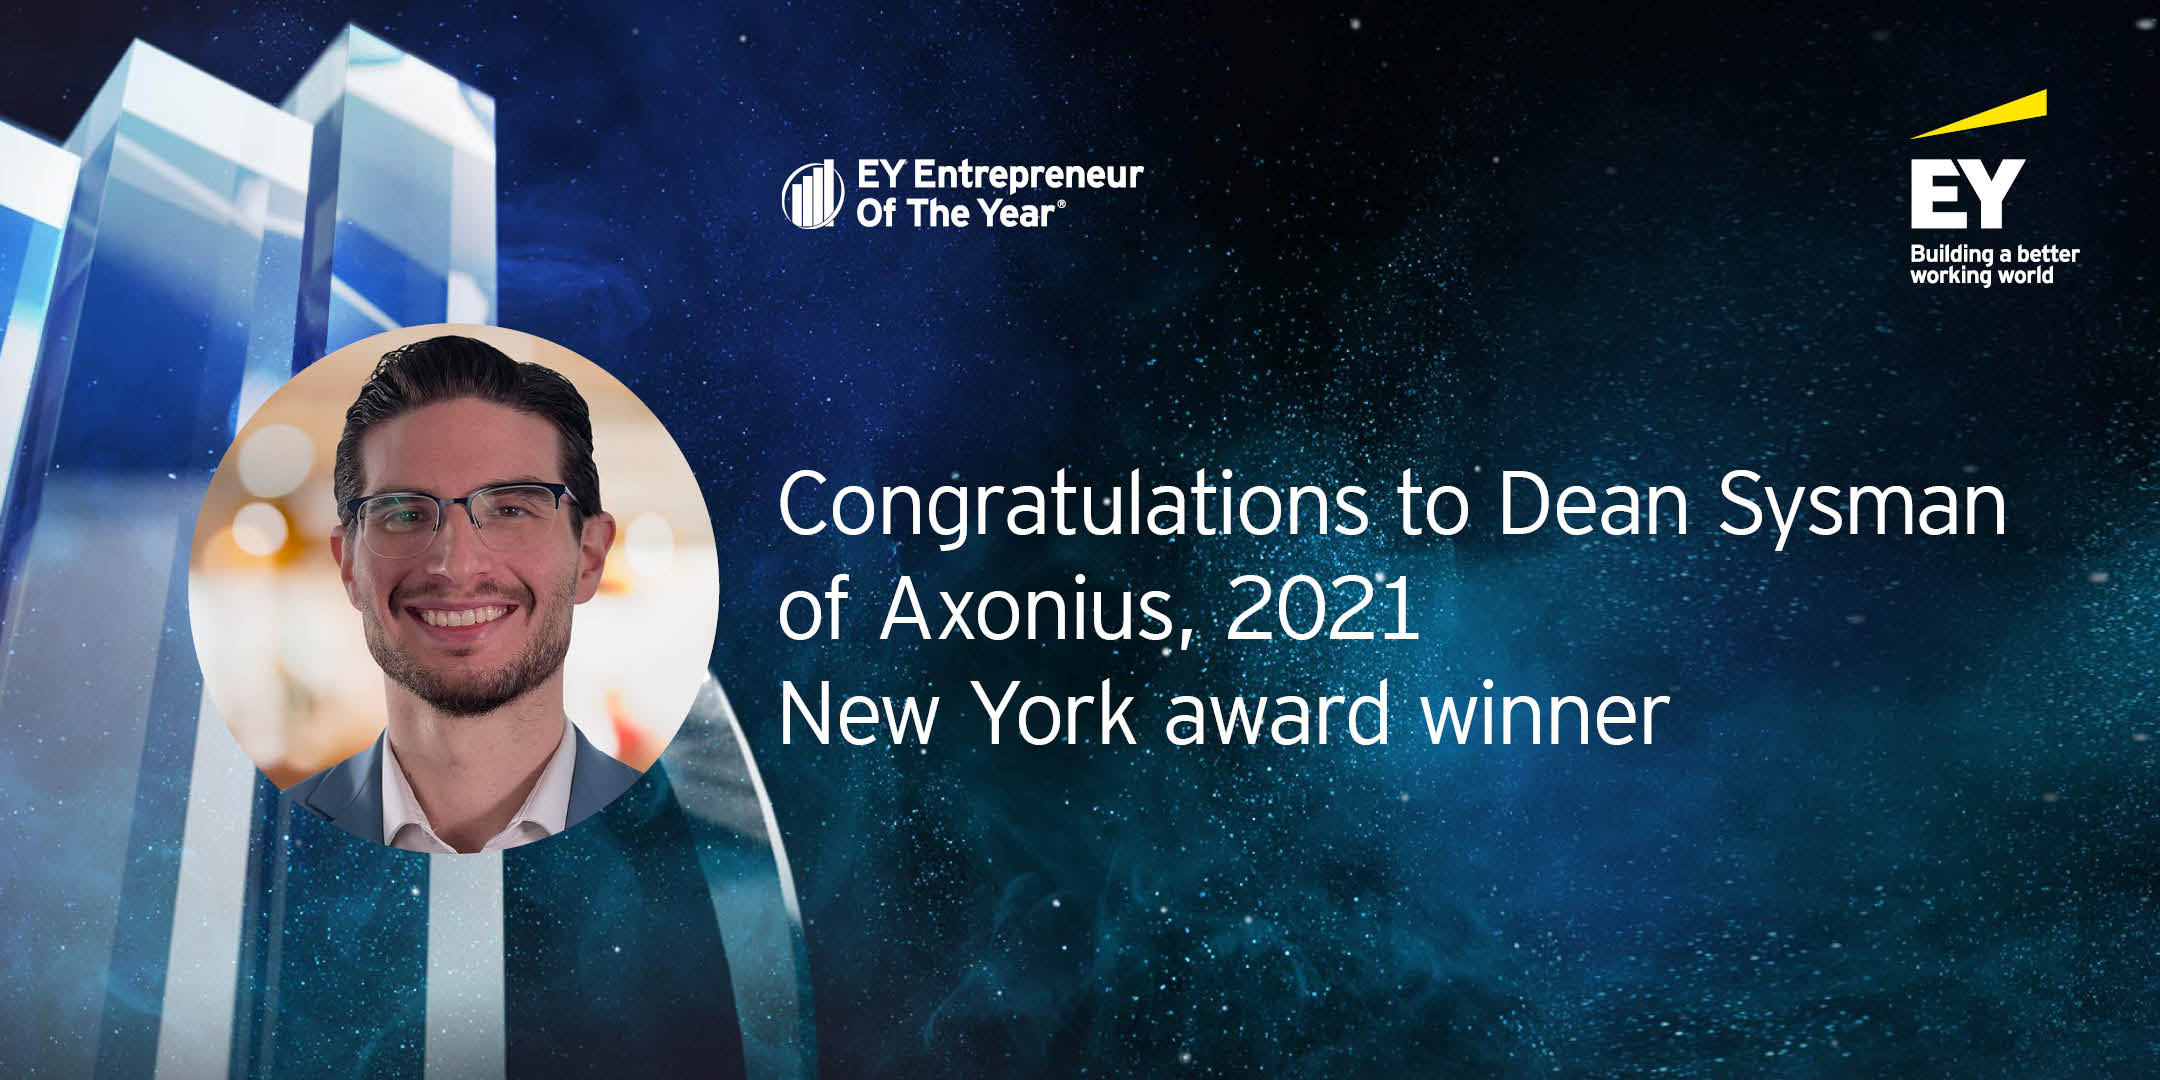 EY Announces Dean Sysman, CEO and Co-Founder of Axonius as an Entrepreneur Of The Year® 2021 New York Award Winner